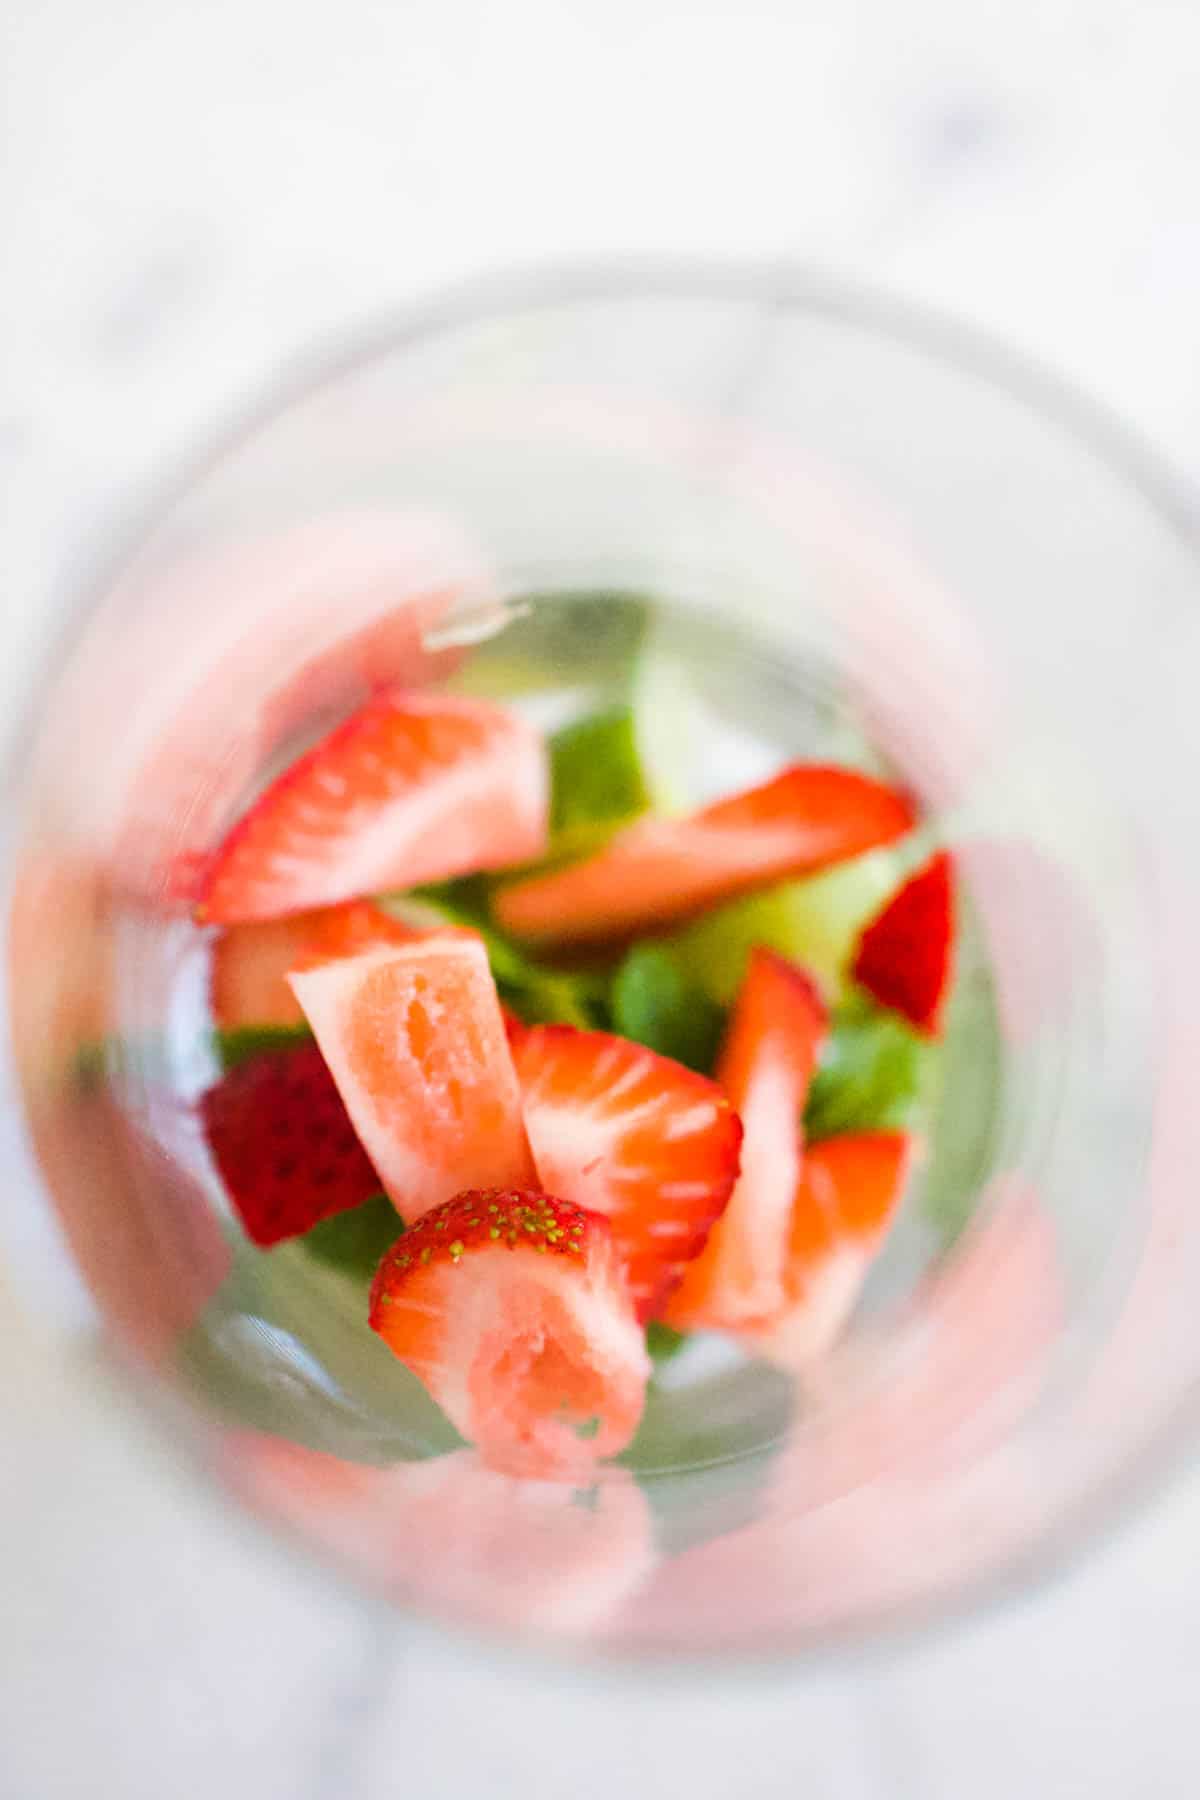 Pieces of strawberry, mint leaves and raw ginger slices in the bottom of a glass.